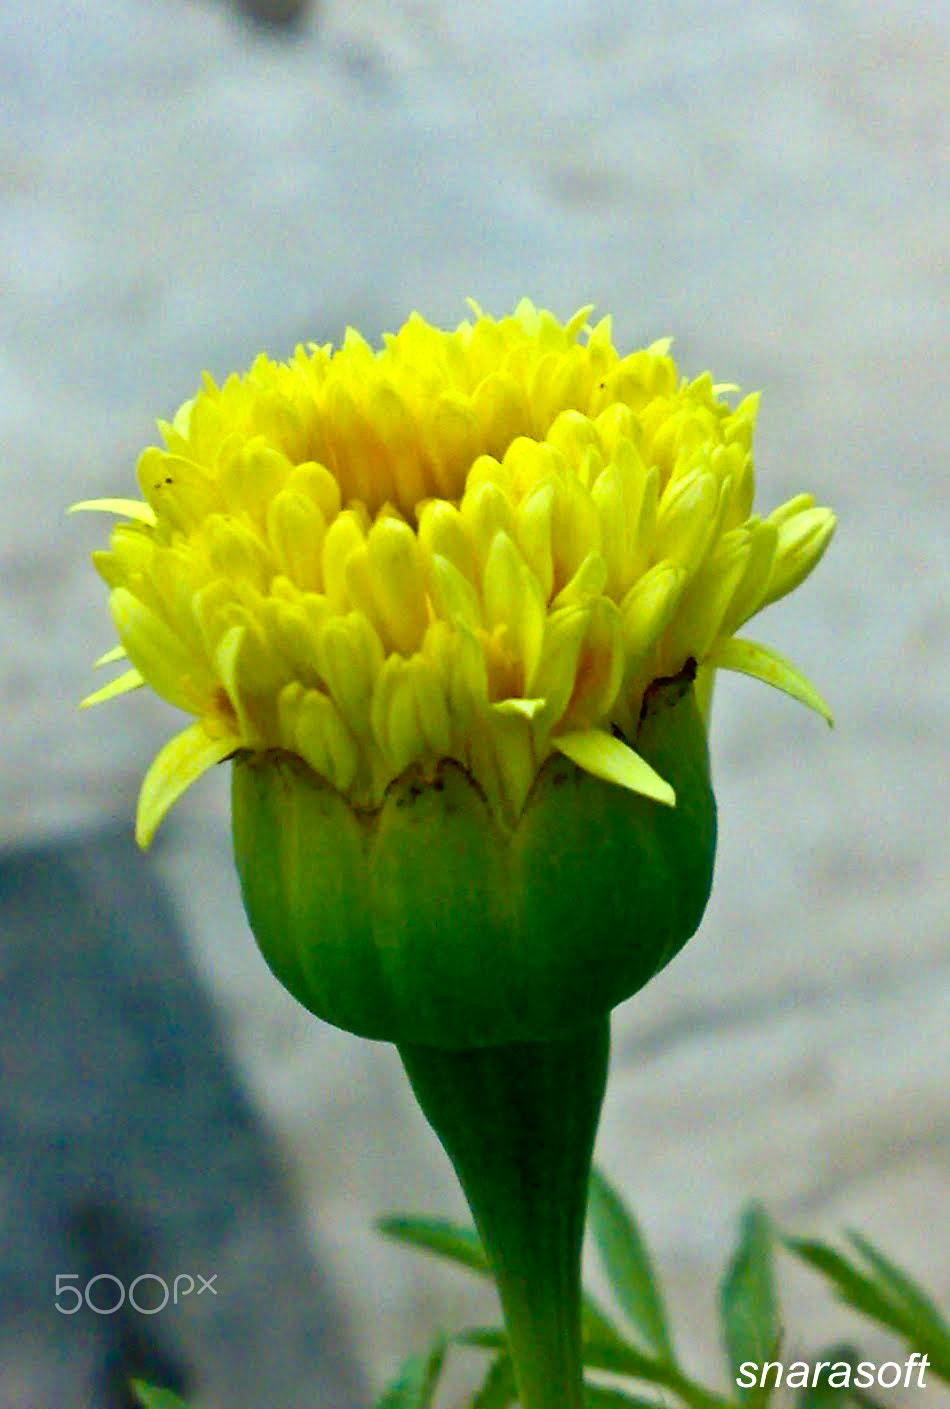 Nokia N73 sample photo. Blooming beauty photography